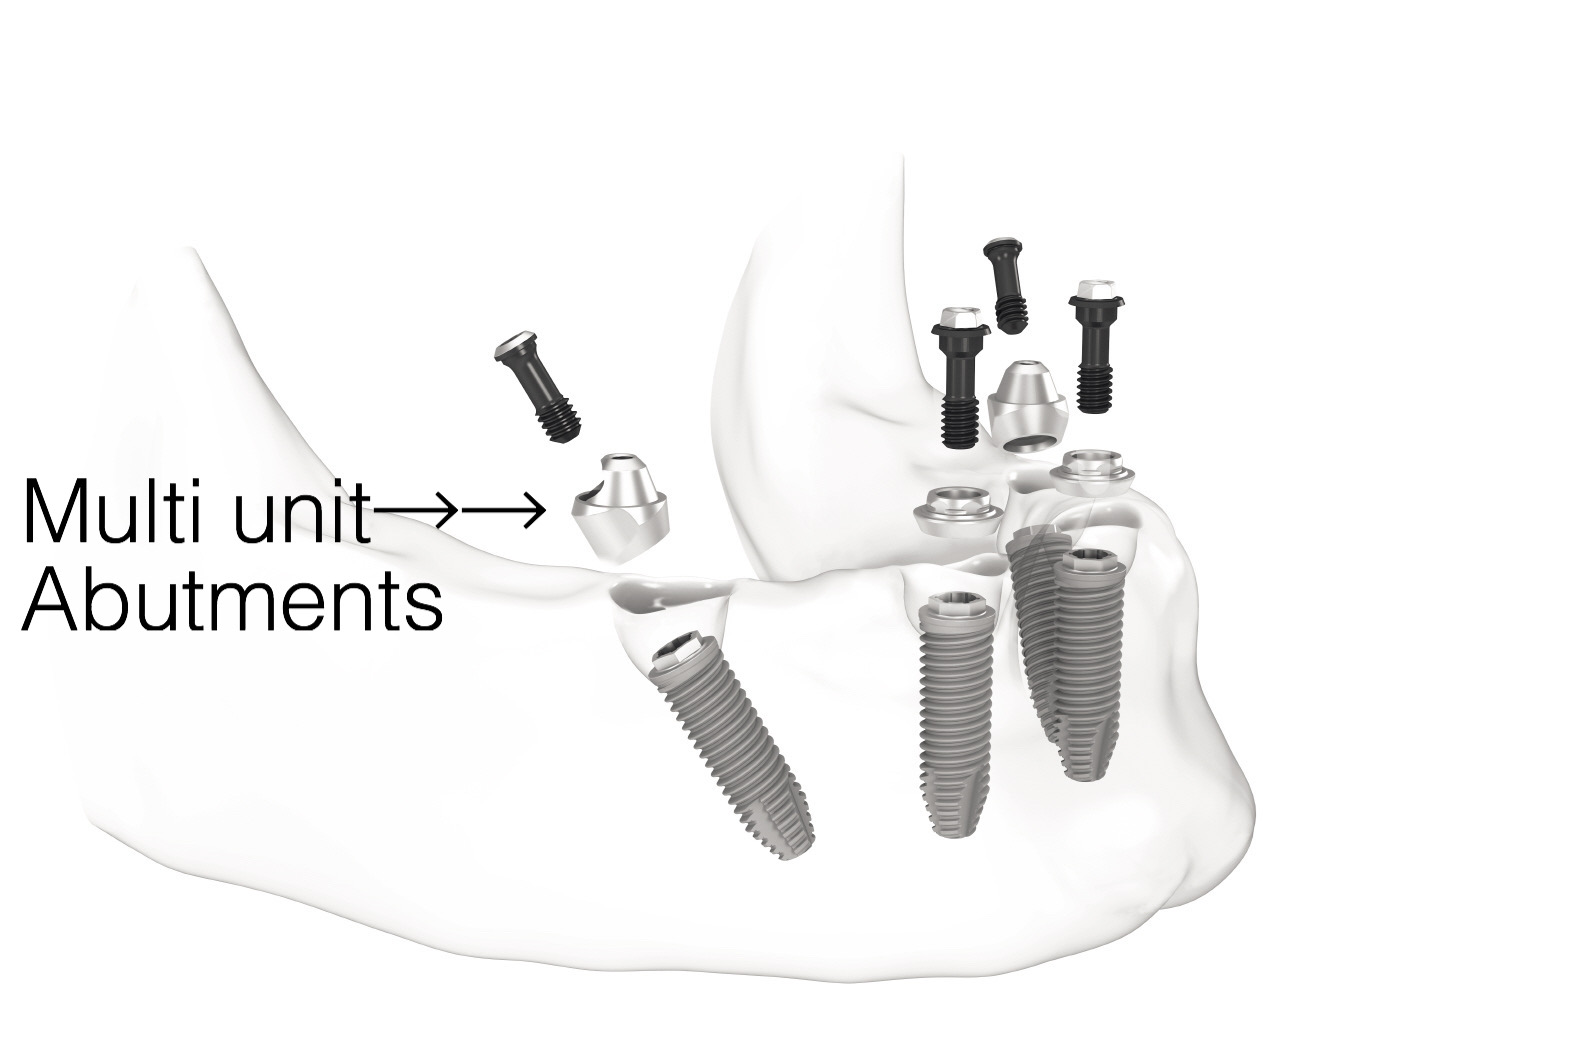 multi unit - Fixed Dentures-All on 4